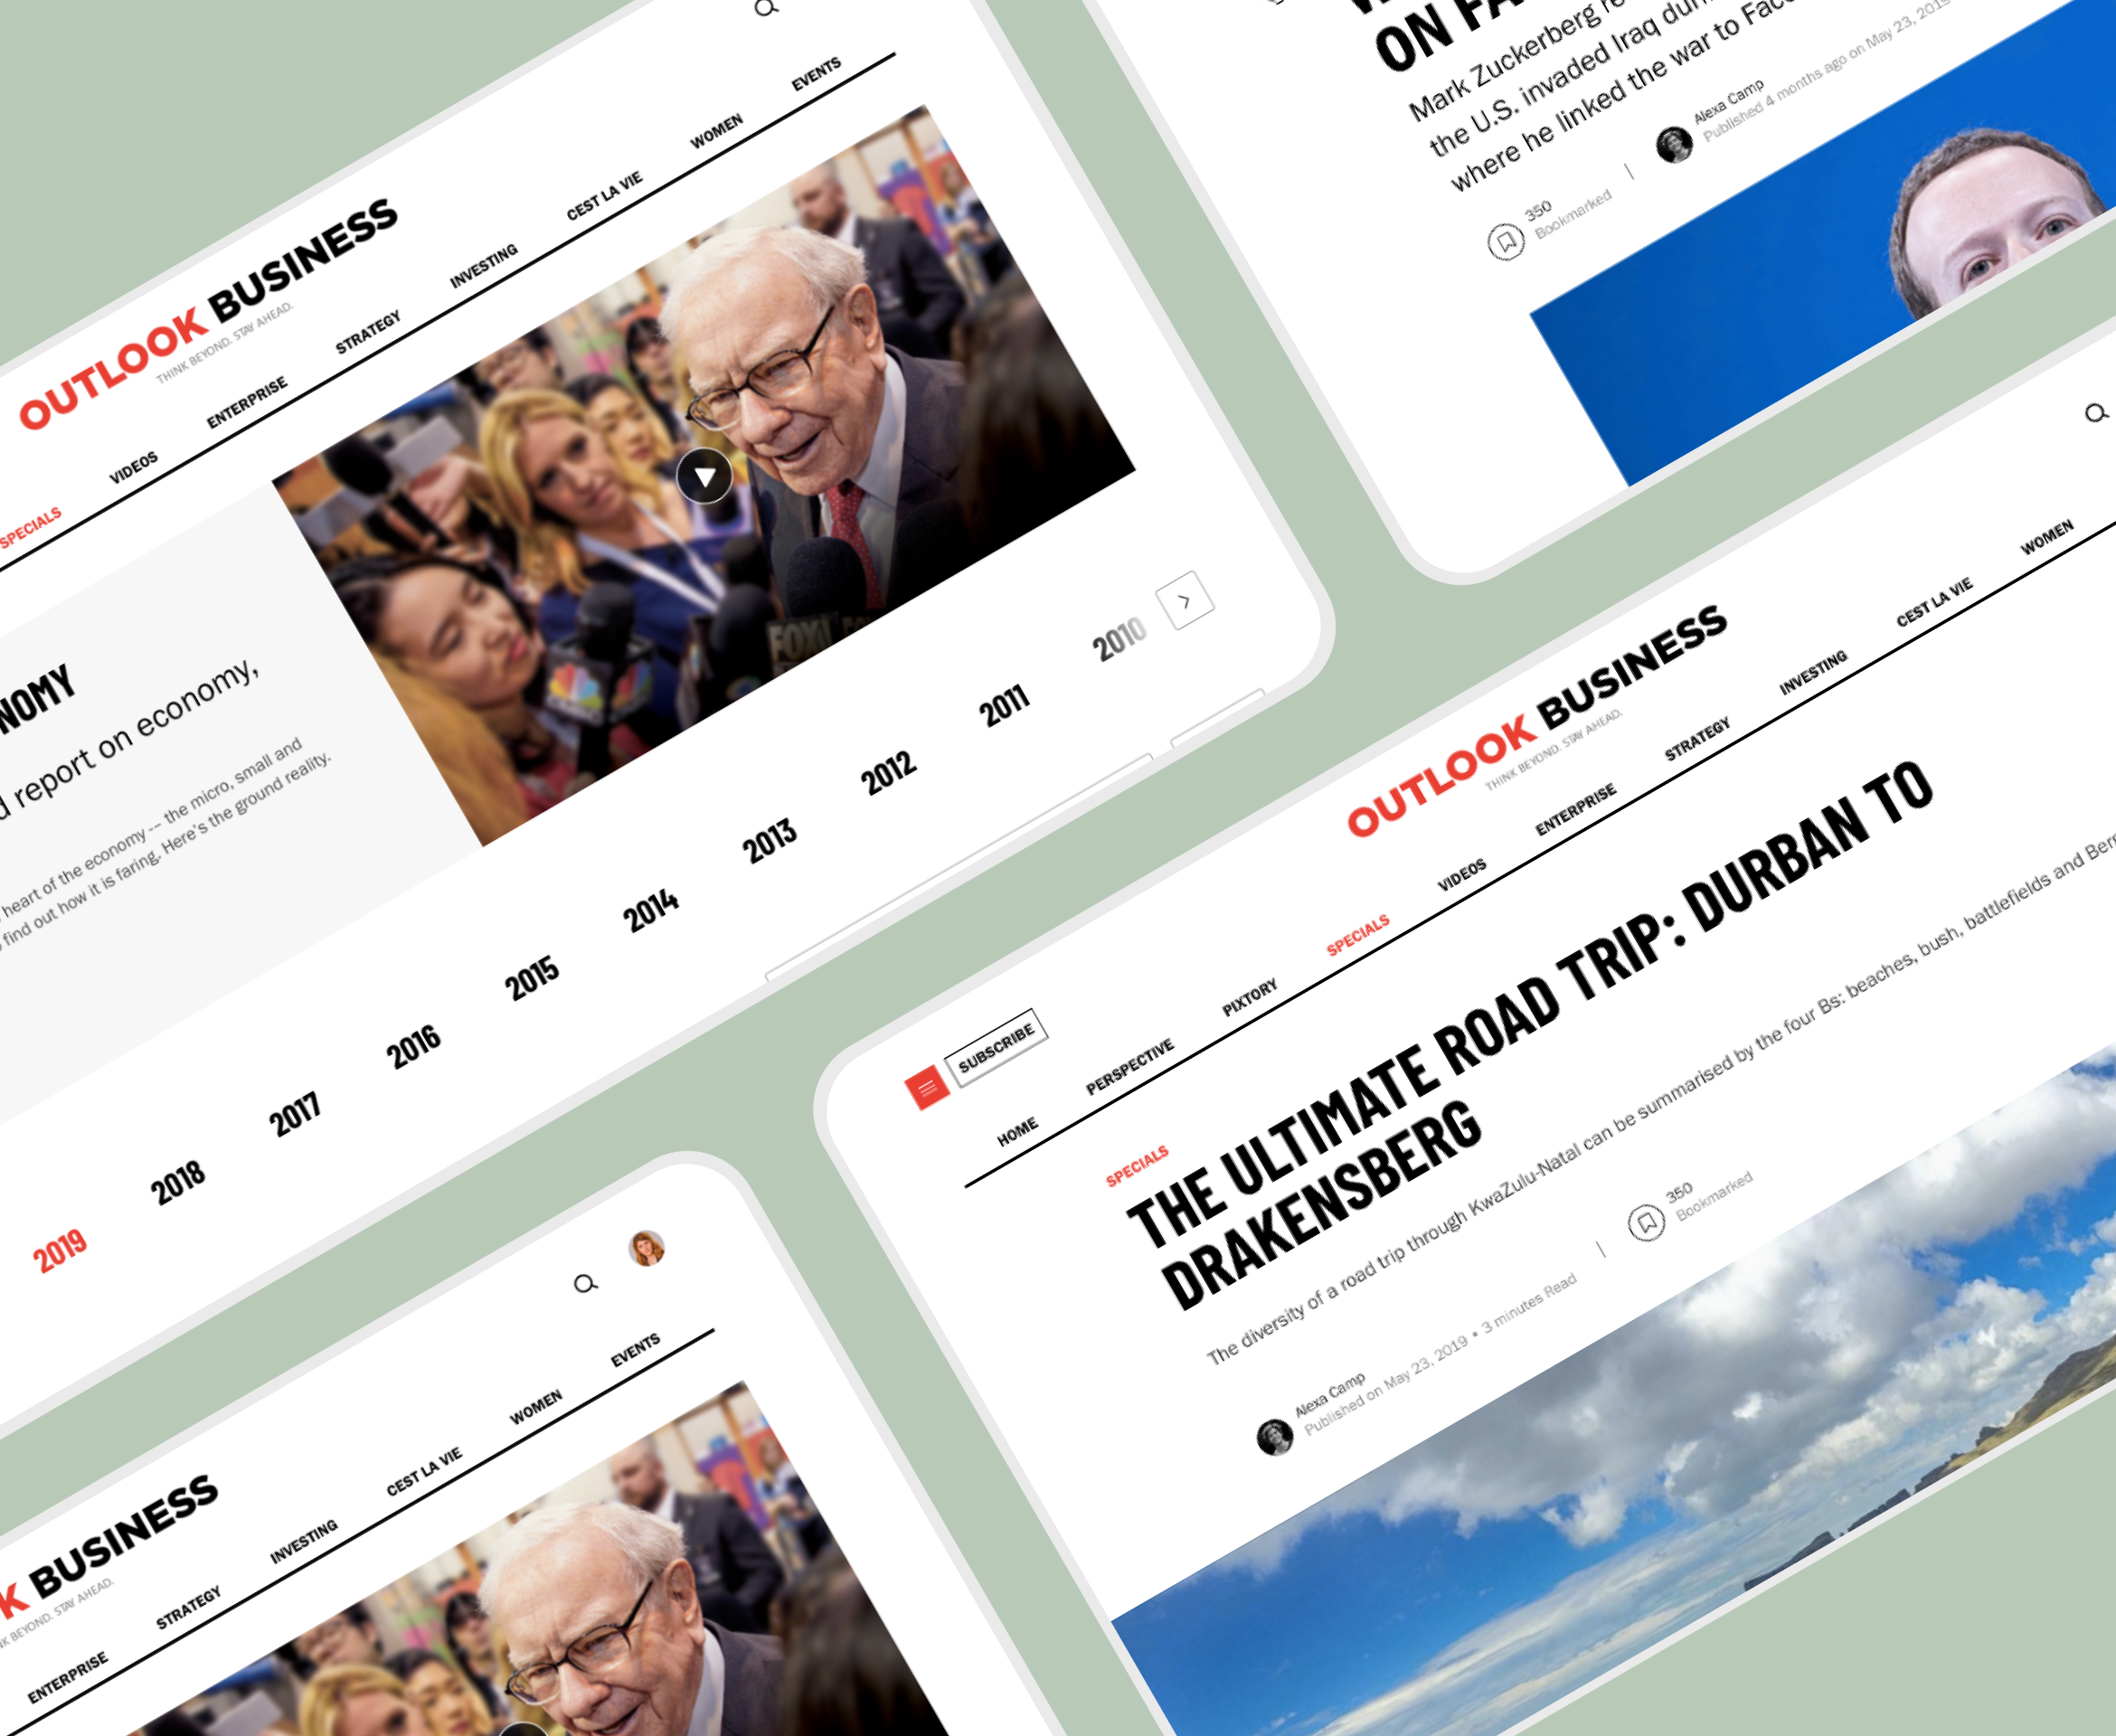 UI/UX Design of News and Media Application and Digital Subscription